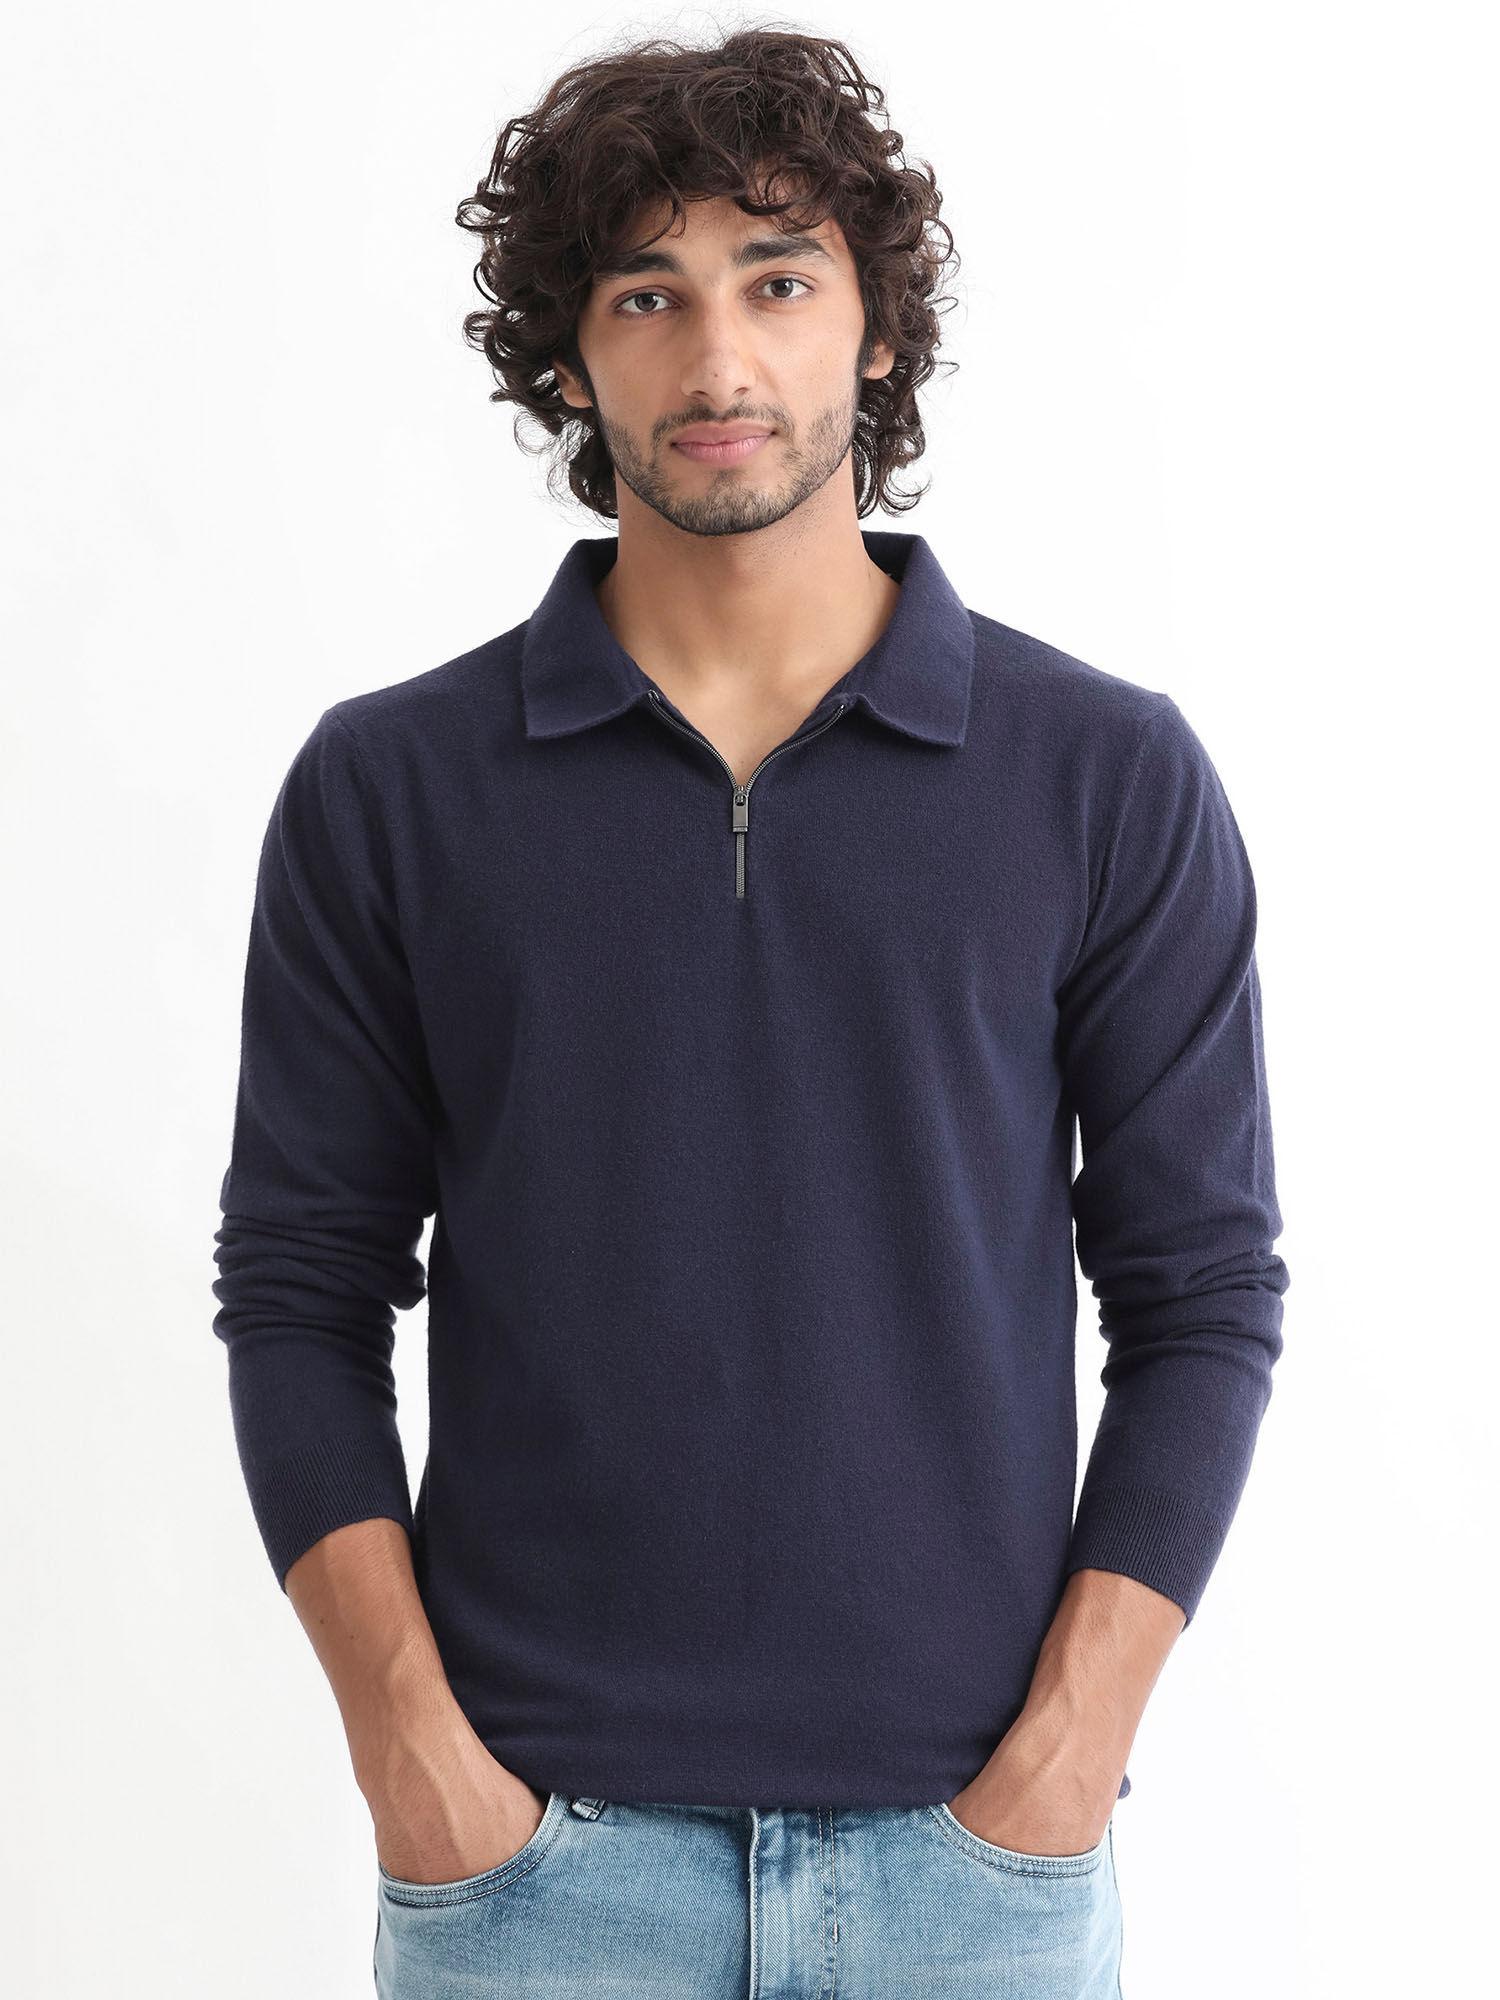 Griffin Primary Navy Blue Sweater